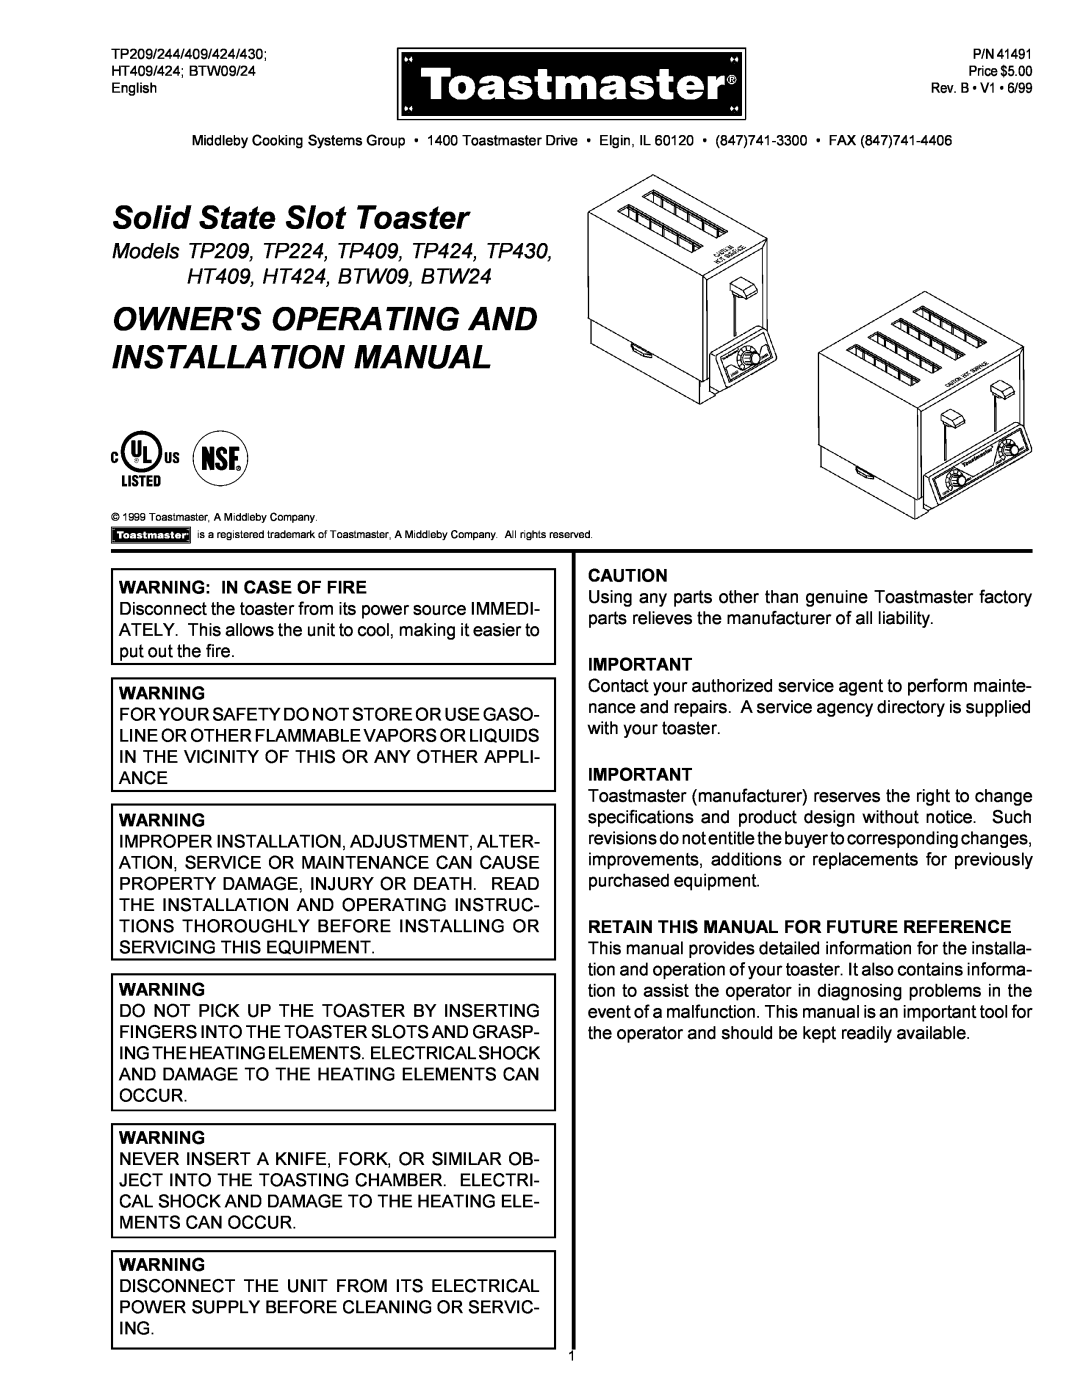 Toastmaster TP424, TP430 installation manual Warning In Case Of Fire, Solid State Slot Toaster, HT409, HT424, BTW09, BTW24 